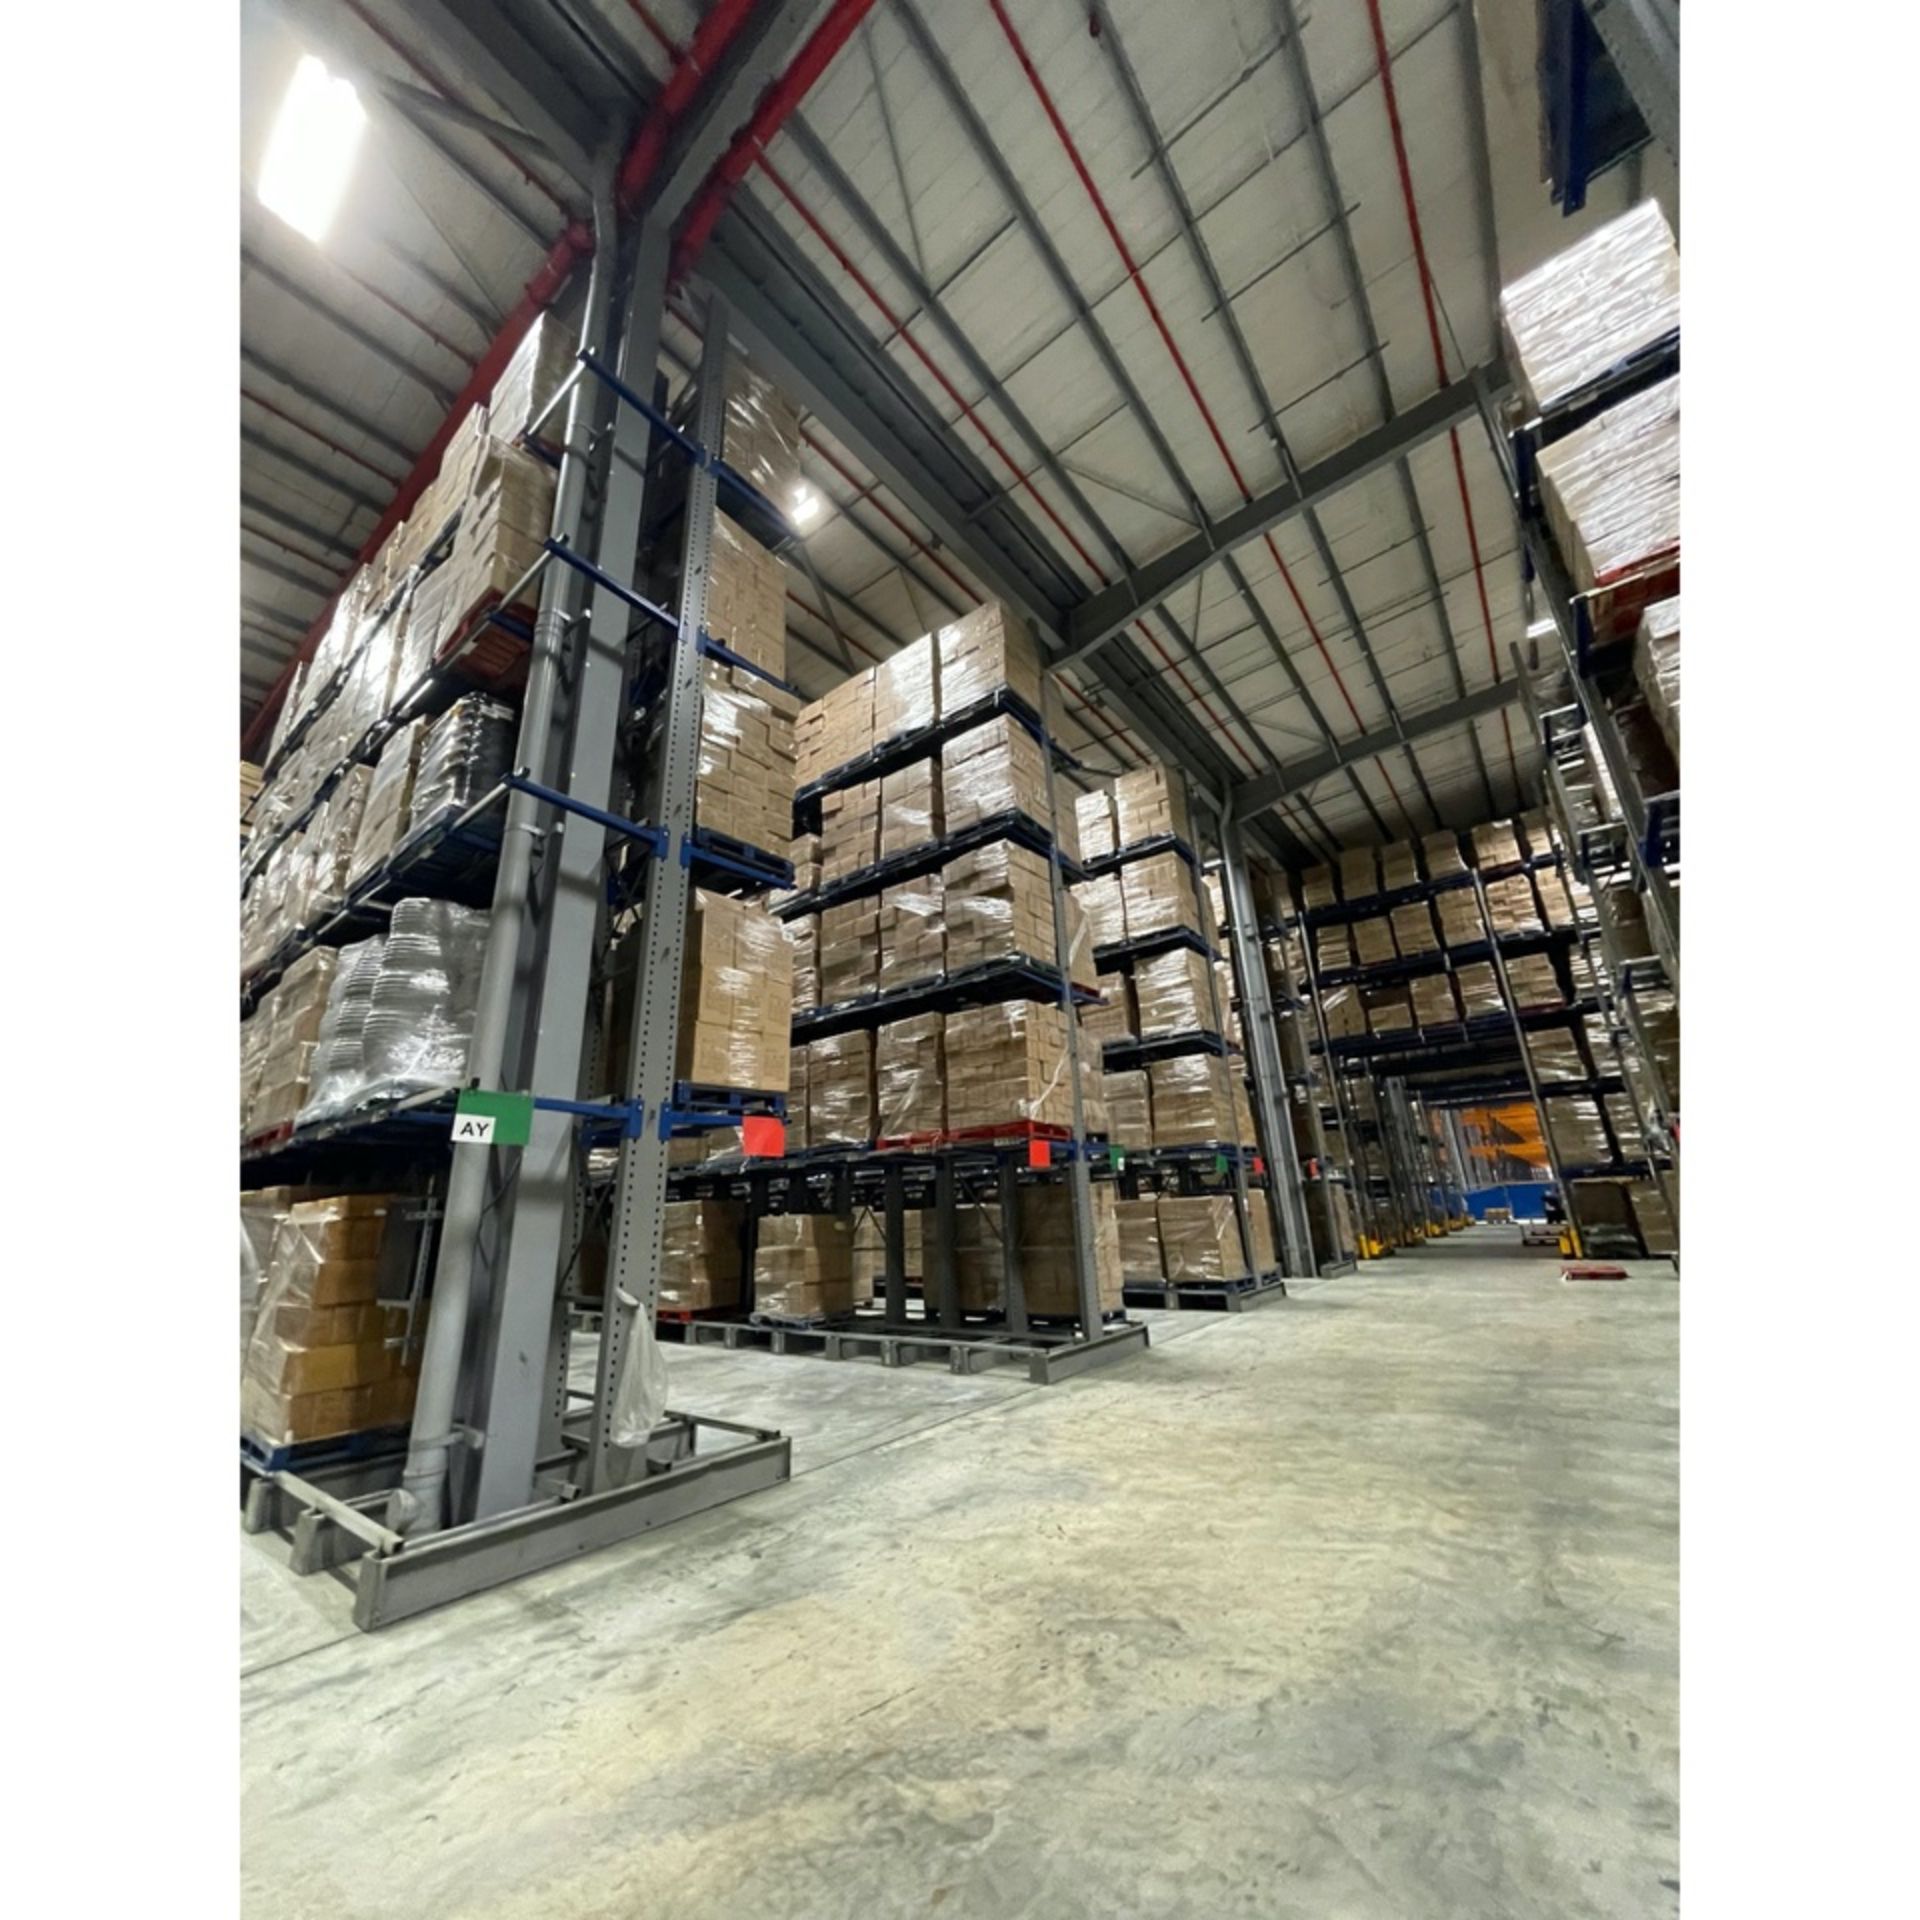 10m HIGH DOUBLE SIDED CANTILEVER RACK, including 16 Joined Bays Creating A 16m Run, 4 Arms Per - Bild 2 aus 3